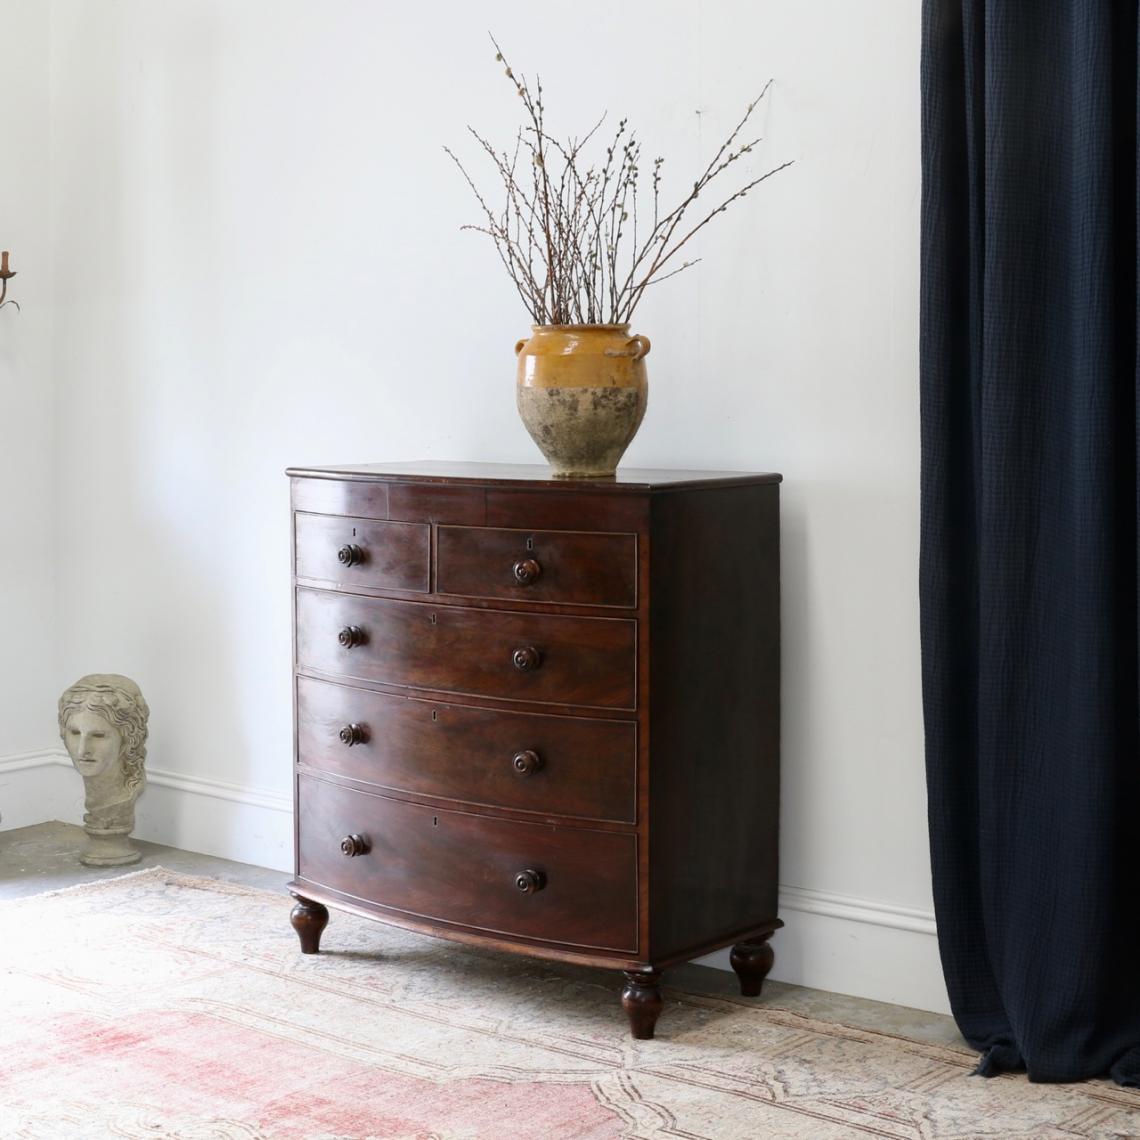 Bow-fronted Chest of Drawers